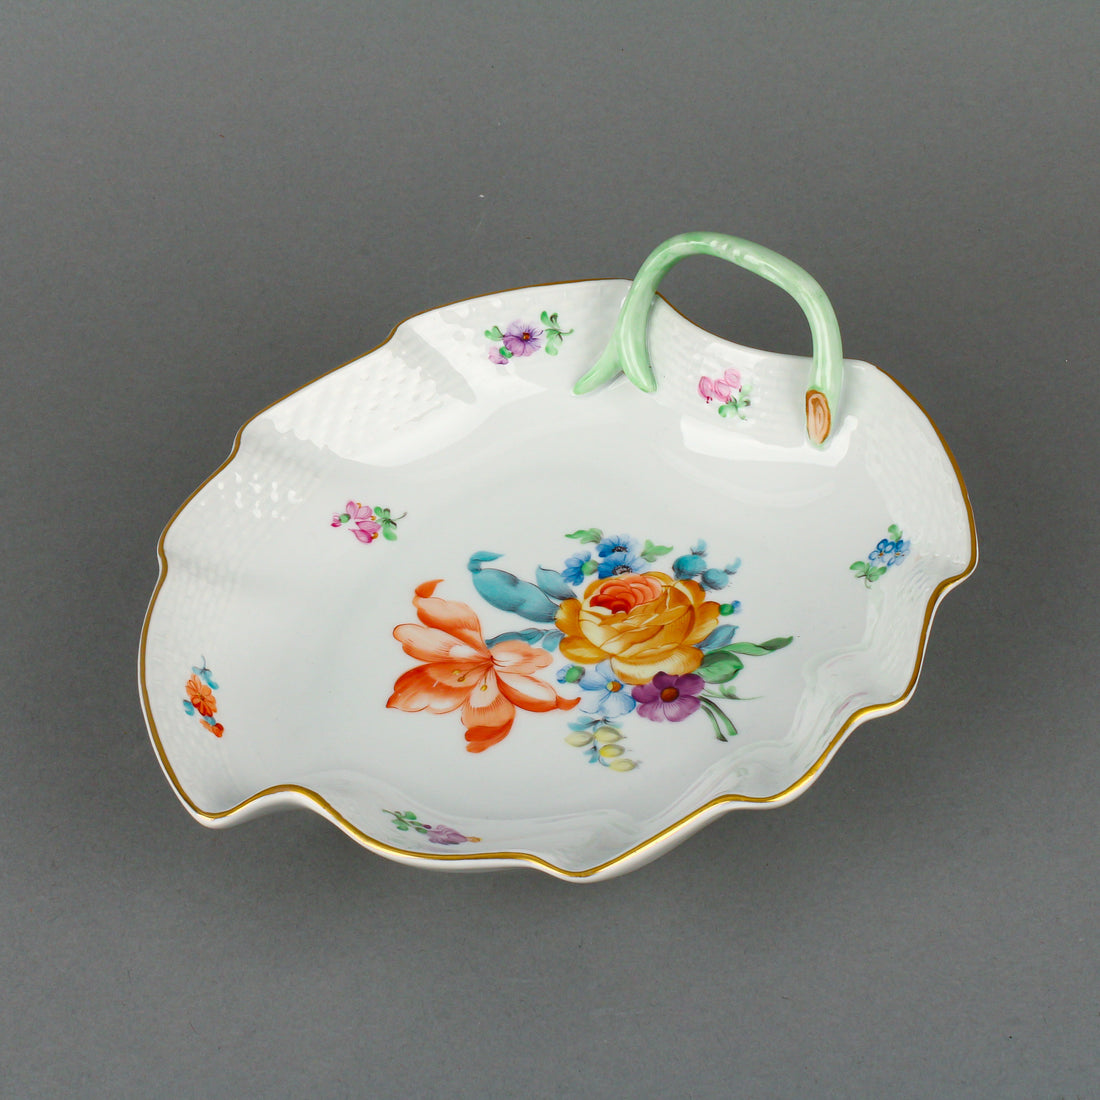 HEREND Floral Leaf Dish with Branch Handle